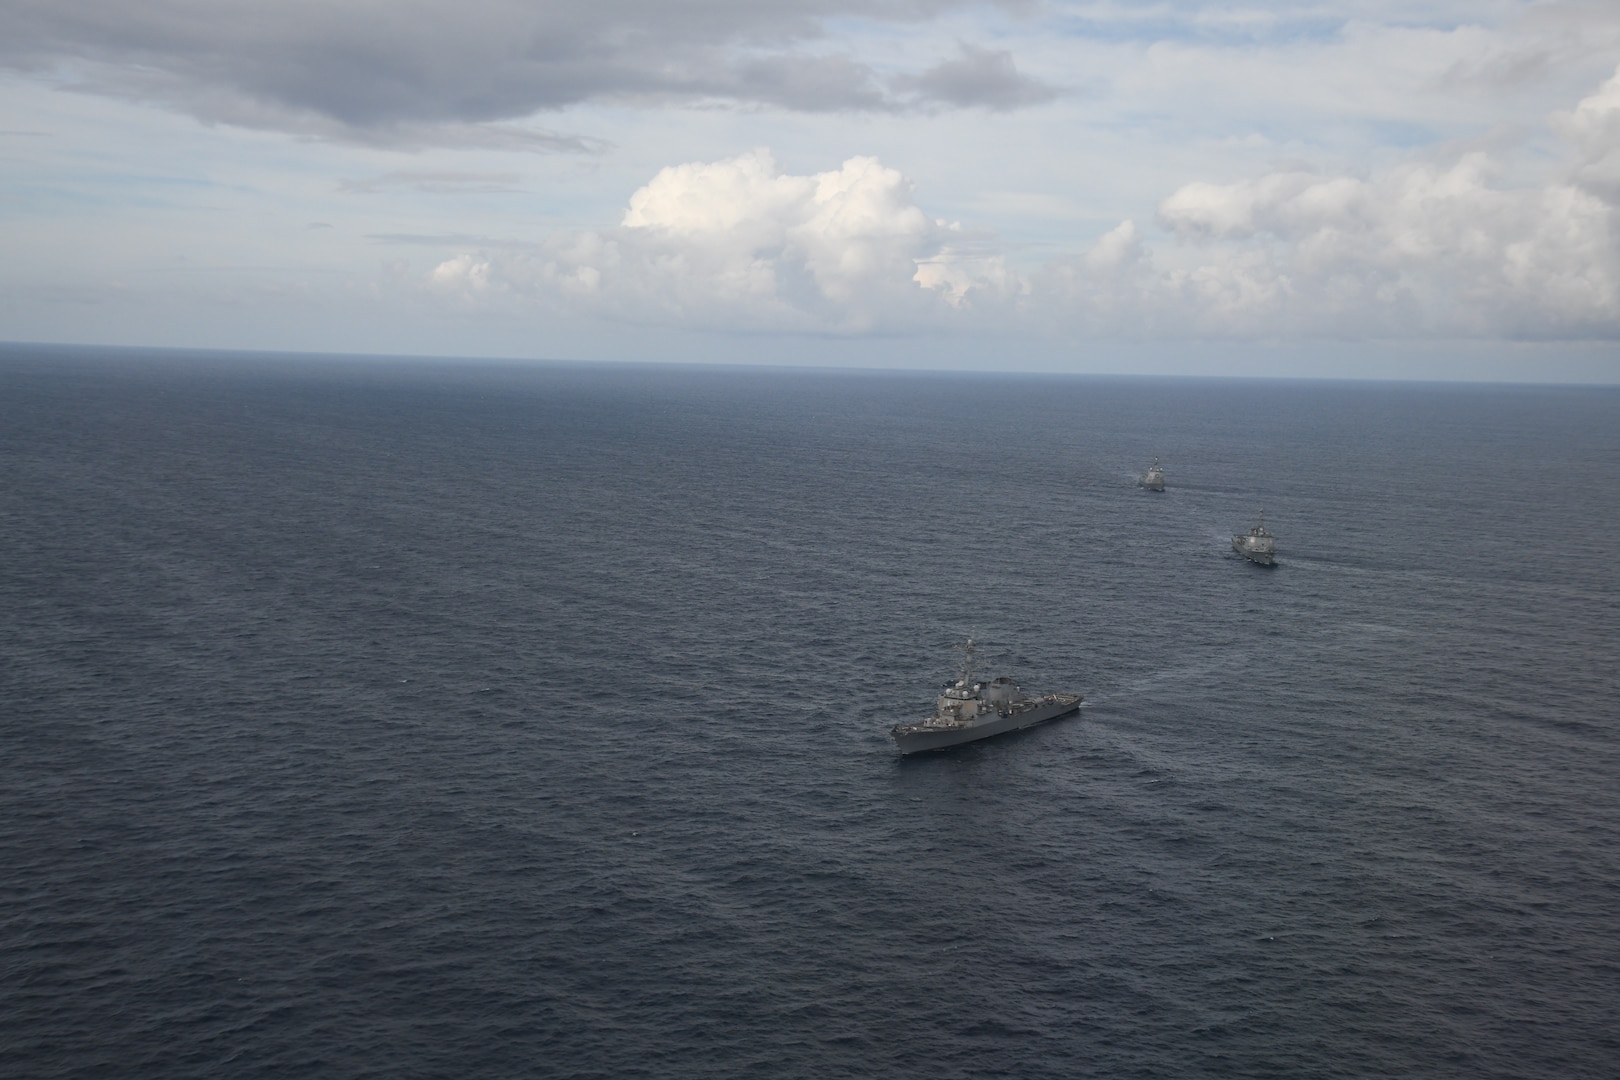 Japanese Maritime Self-Defense Force Maya-class guided missile destroyer Haguro (DDG-180); Arleigh Burke-class guided-missile destroyer USS Benfold (DDG 65); and Republic of Korea Sejong the Great-class destroyer Yulgok Yi (DDG-992) sail in formation during a trilateral exercise on Aug. 29.